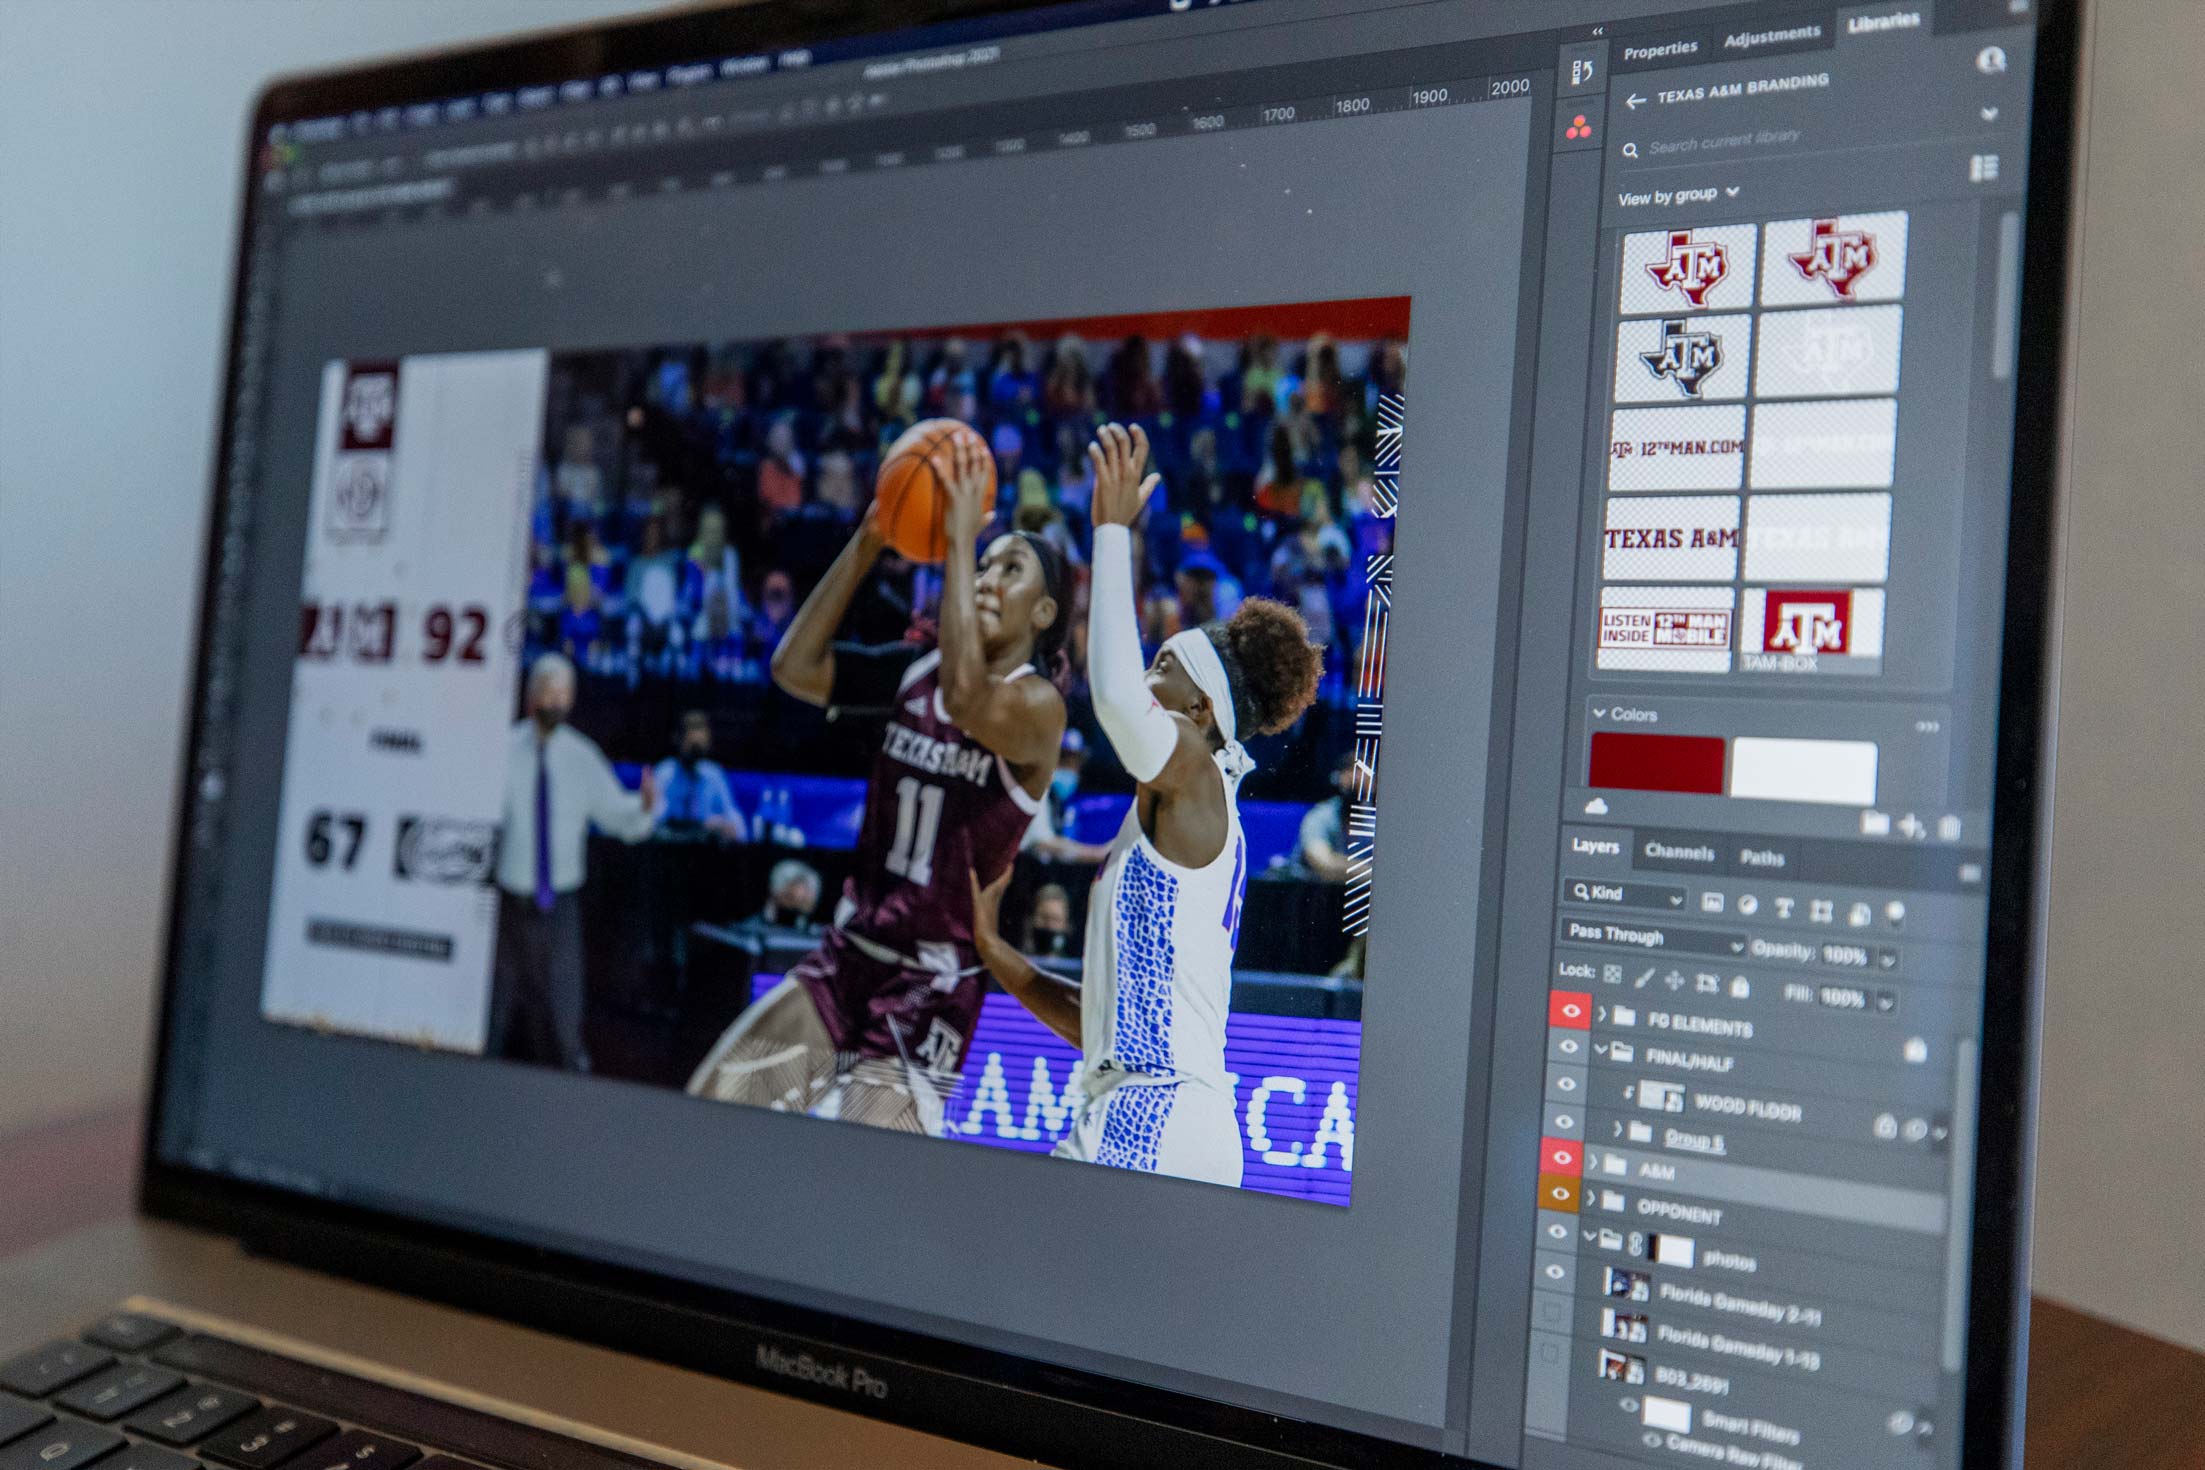 Laptop screen with a picture of women's basketball players on it